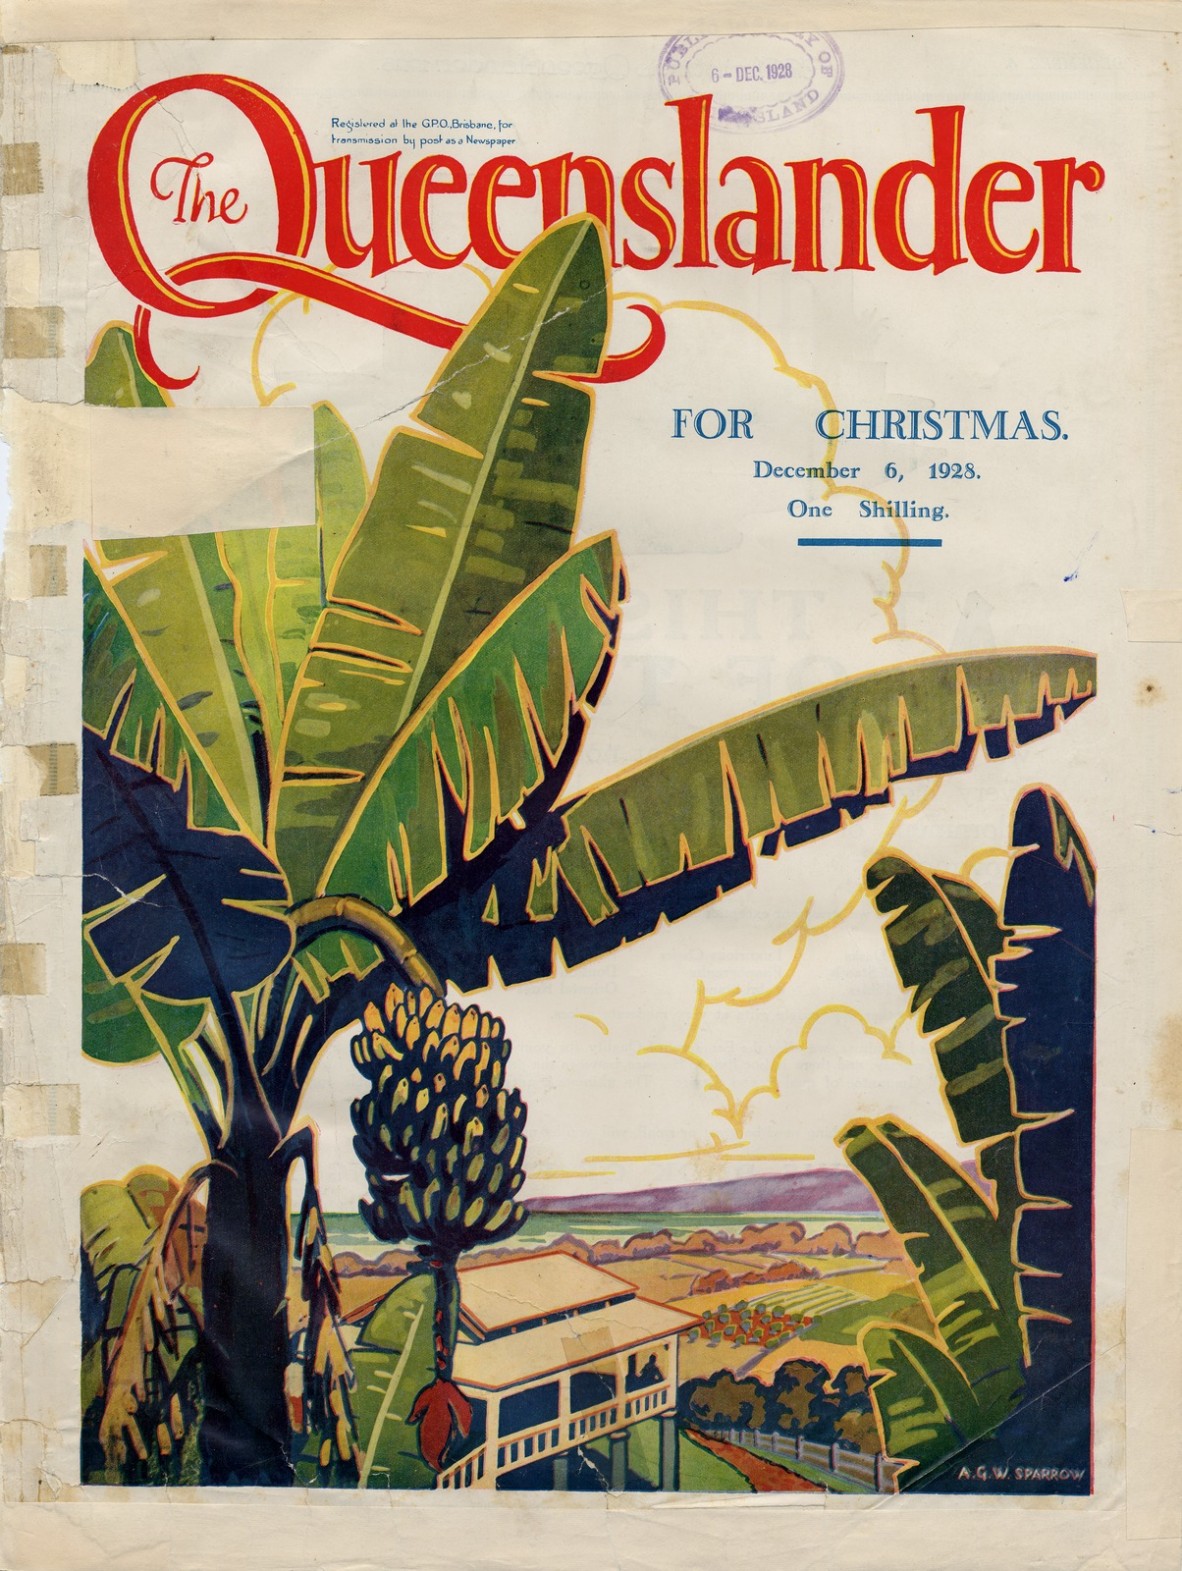 Illustrated front cover from The Queenslander December 6 1928